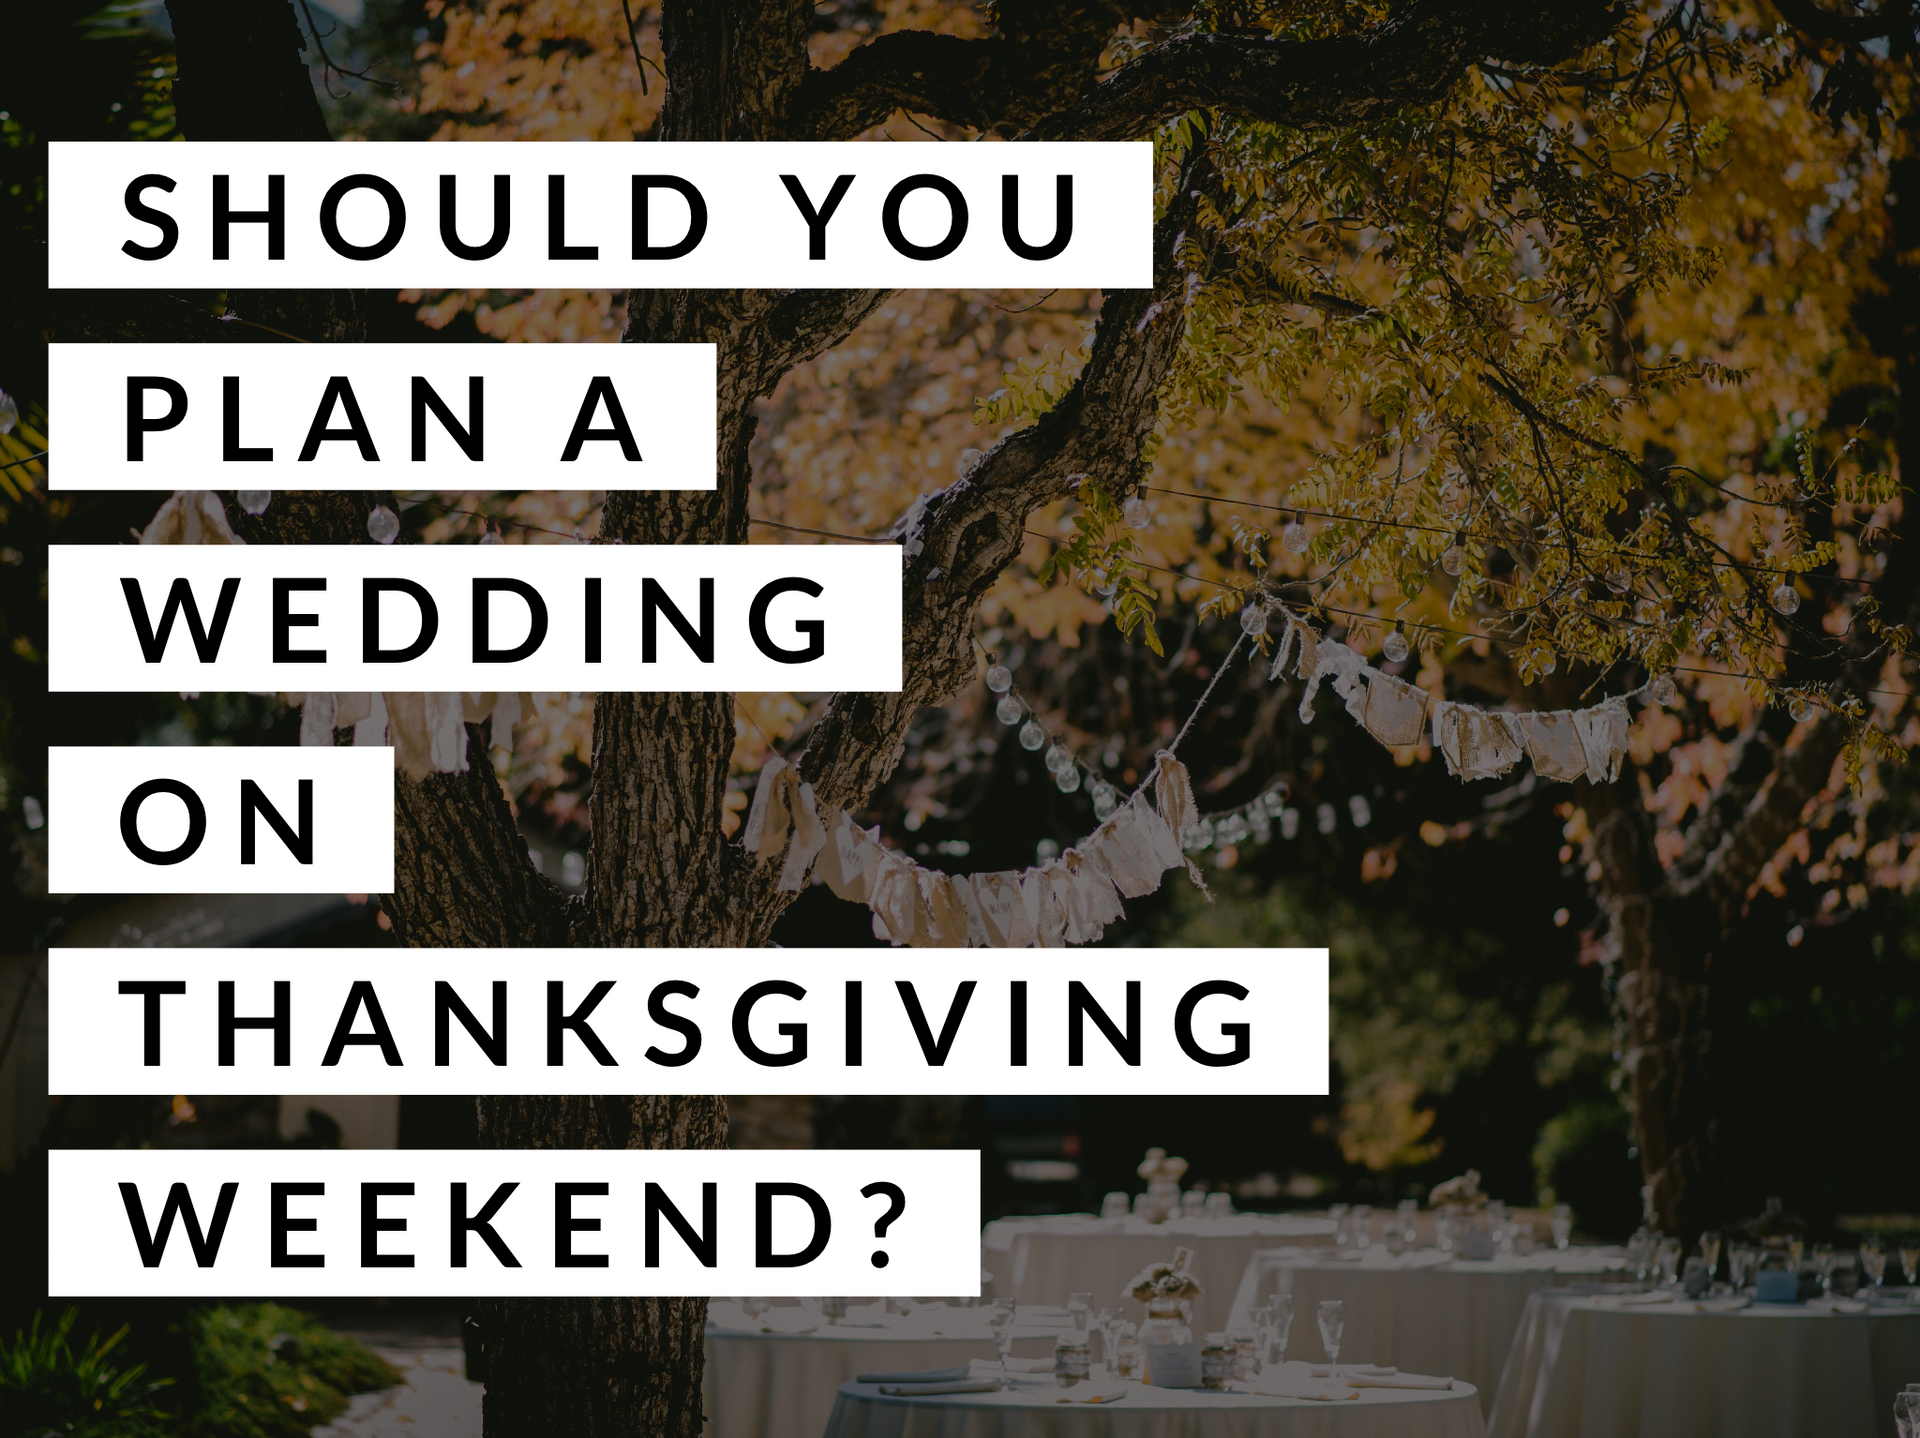 Should You Plan a Wedding on Thanksgiving Weekend?